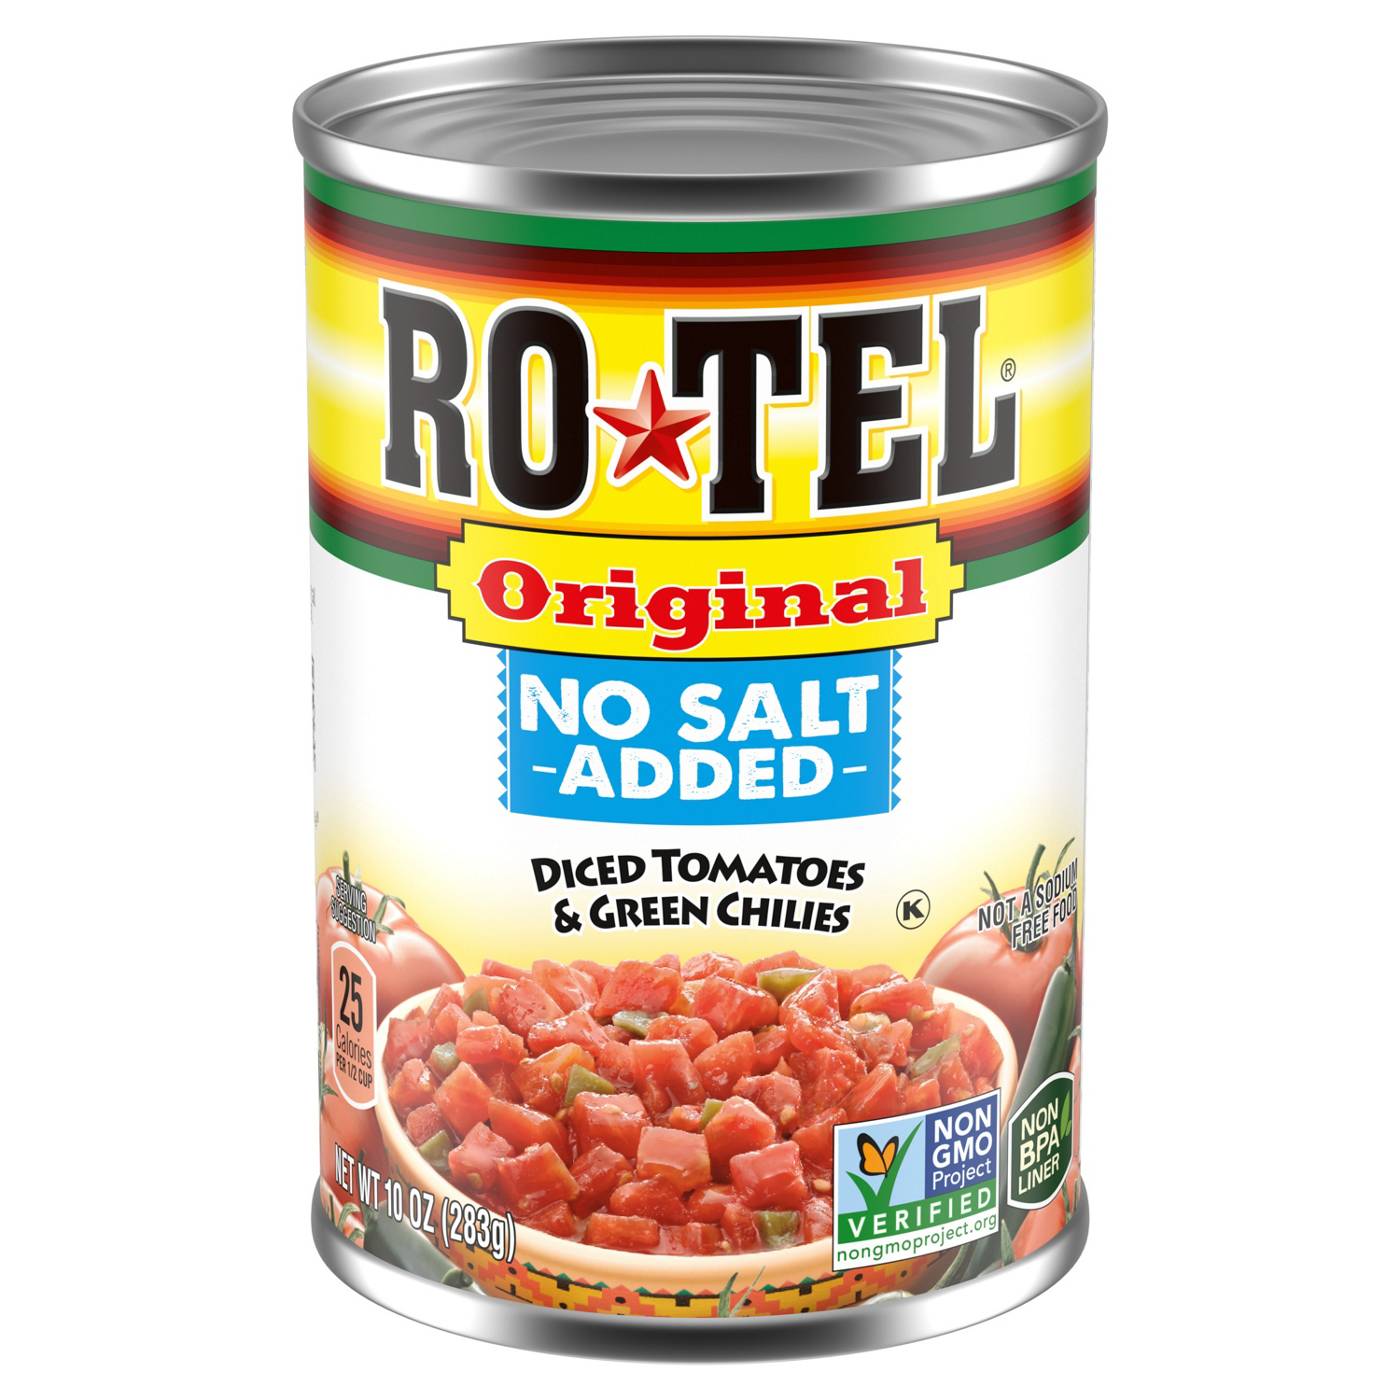 Ro-Tel Original No Salt Added Diced Tomatoes and Green Chilies; image 1 of 6